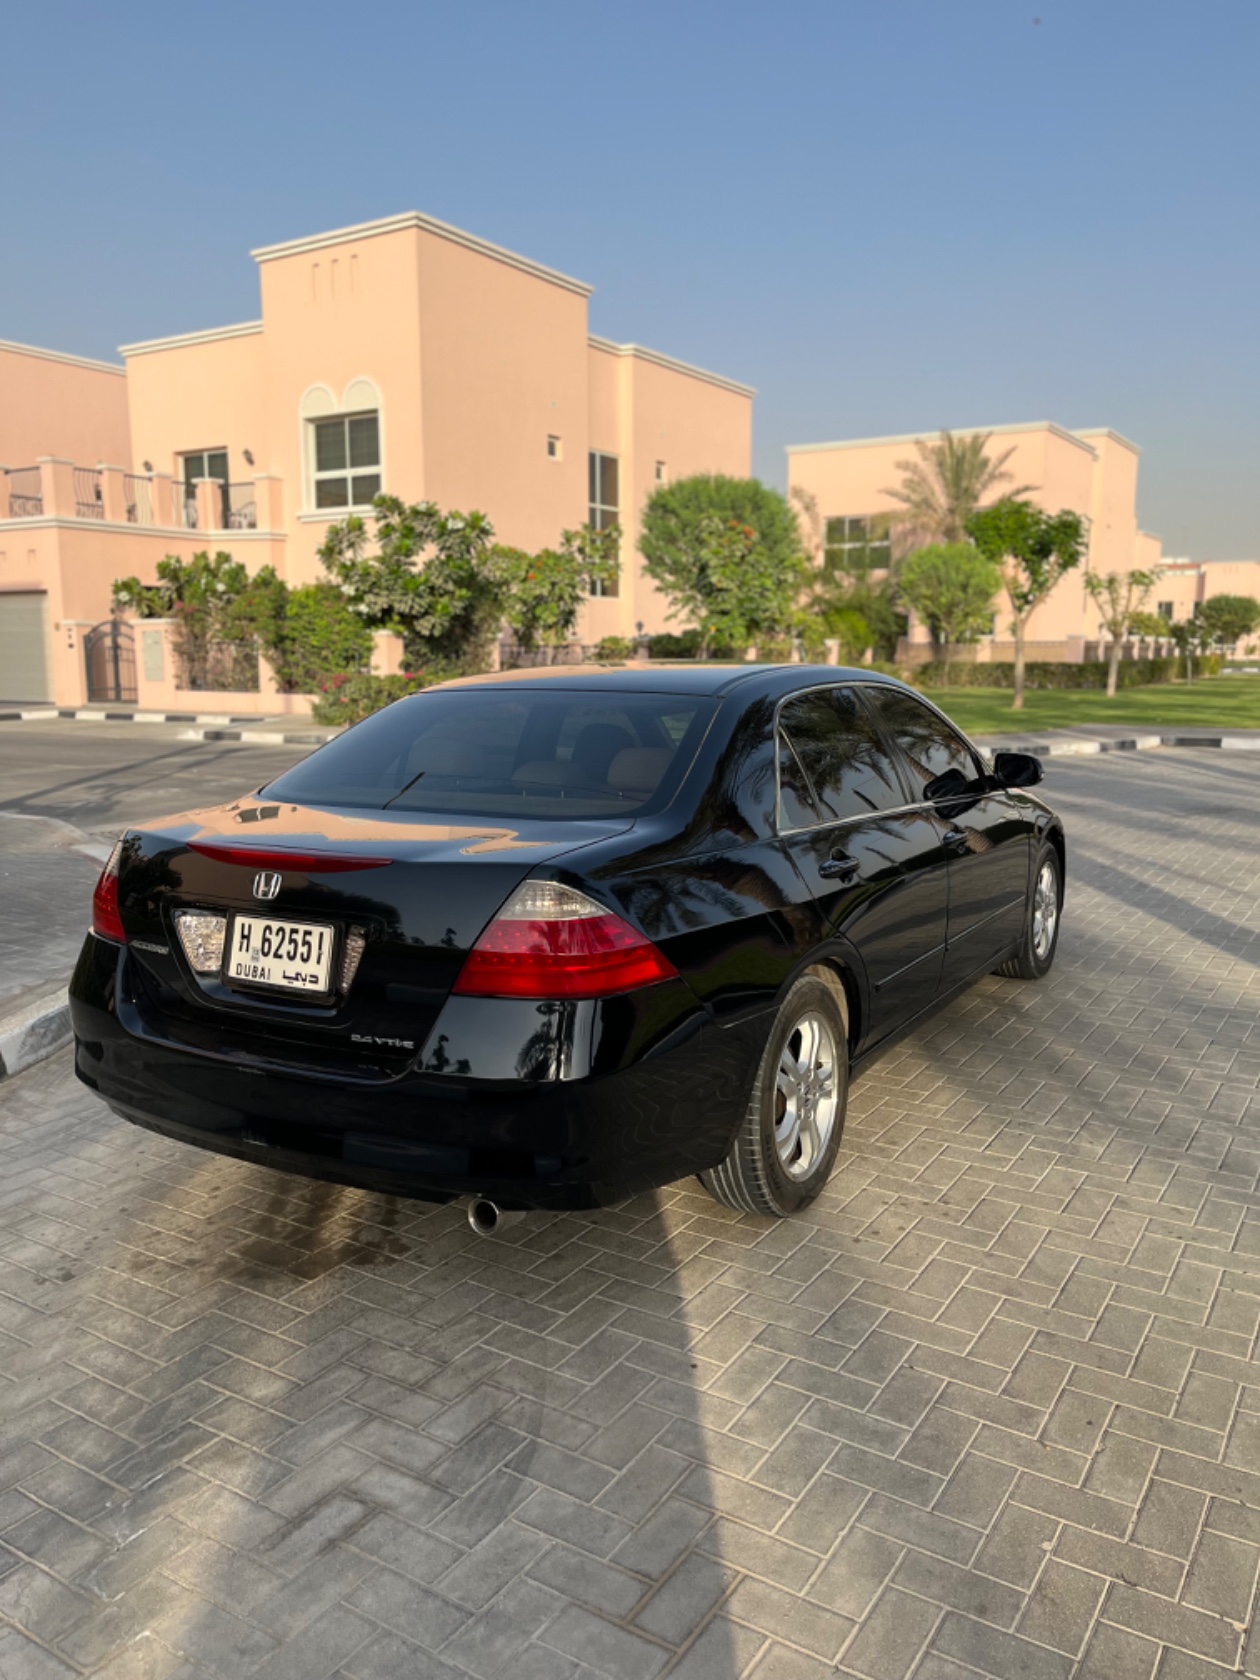 Finding the Perfect Ride: The Benefits of Buying Used in the UAE